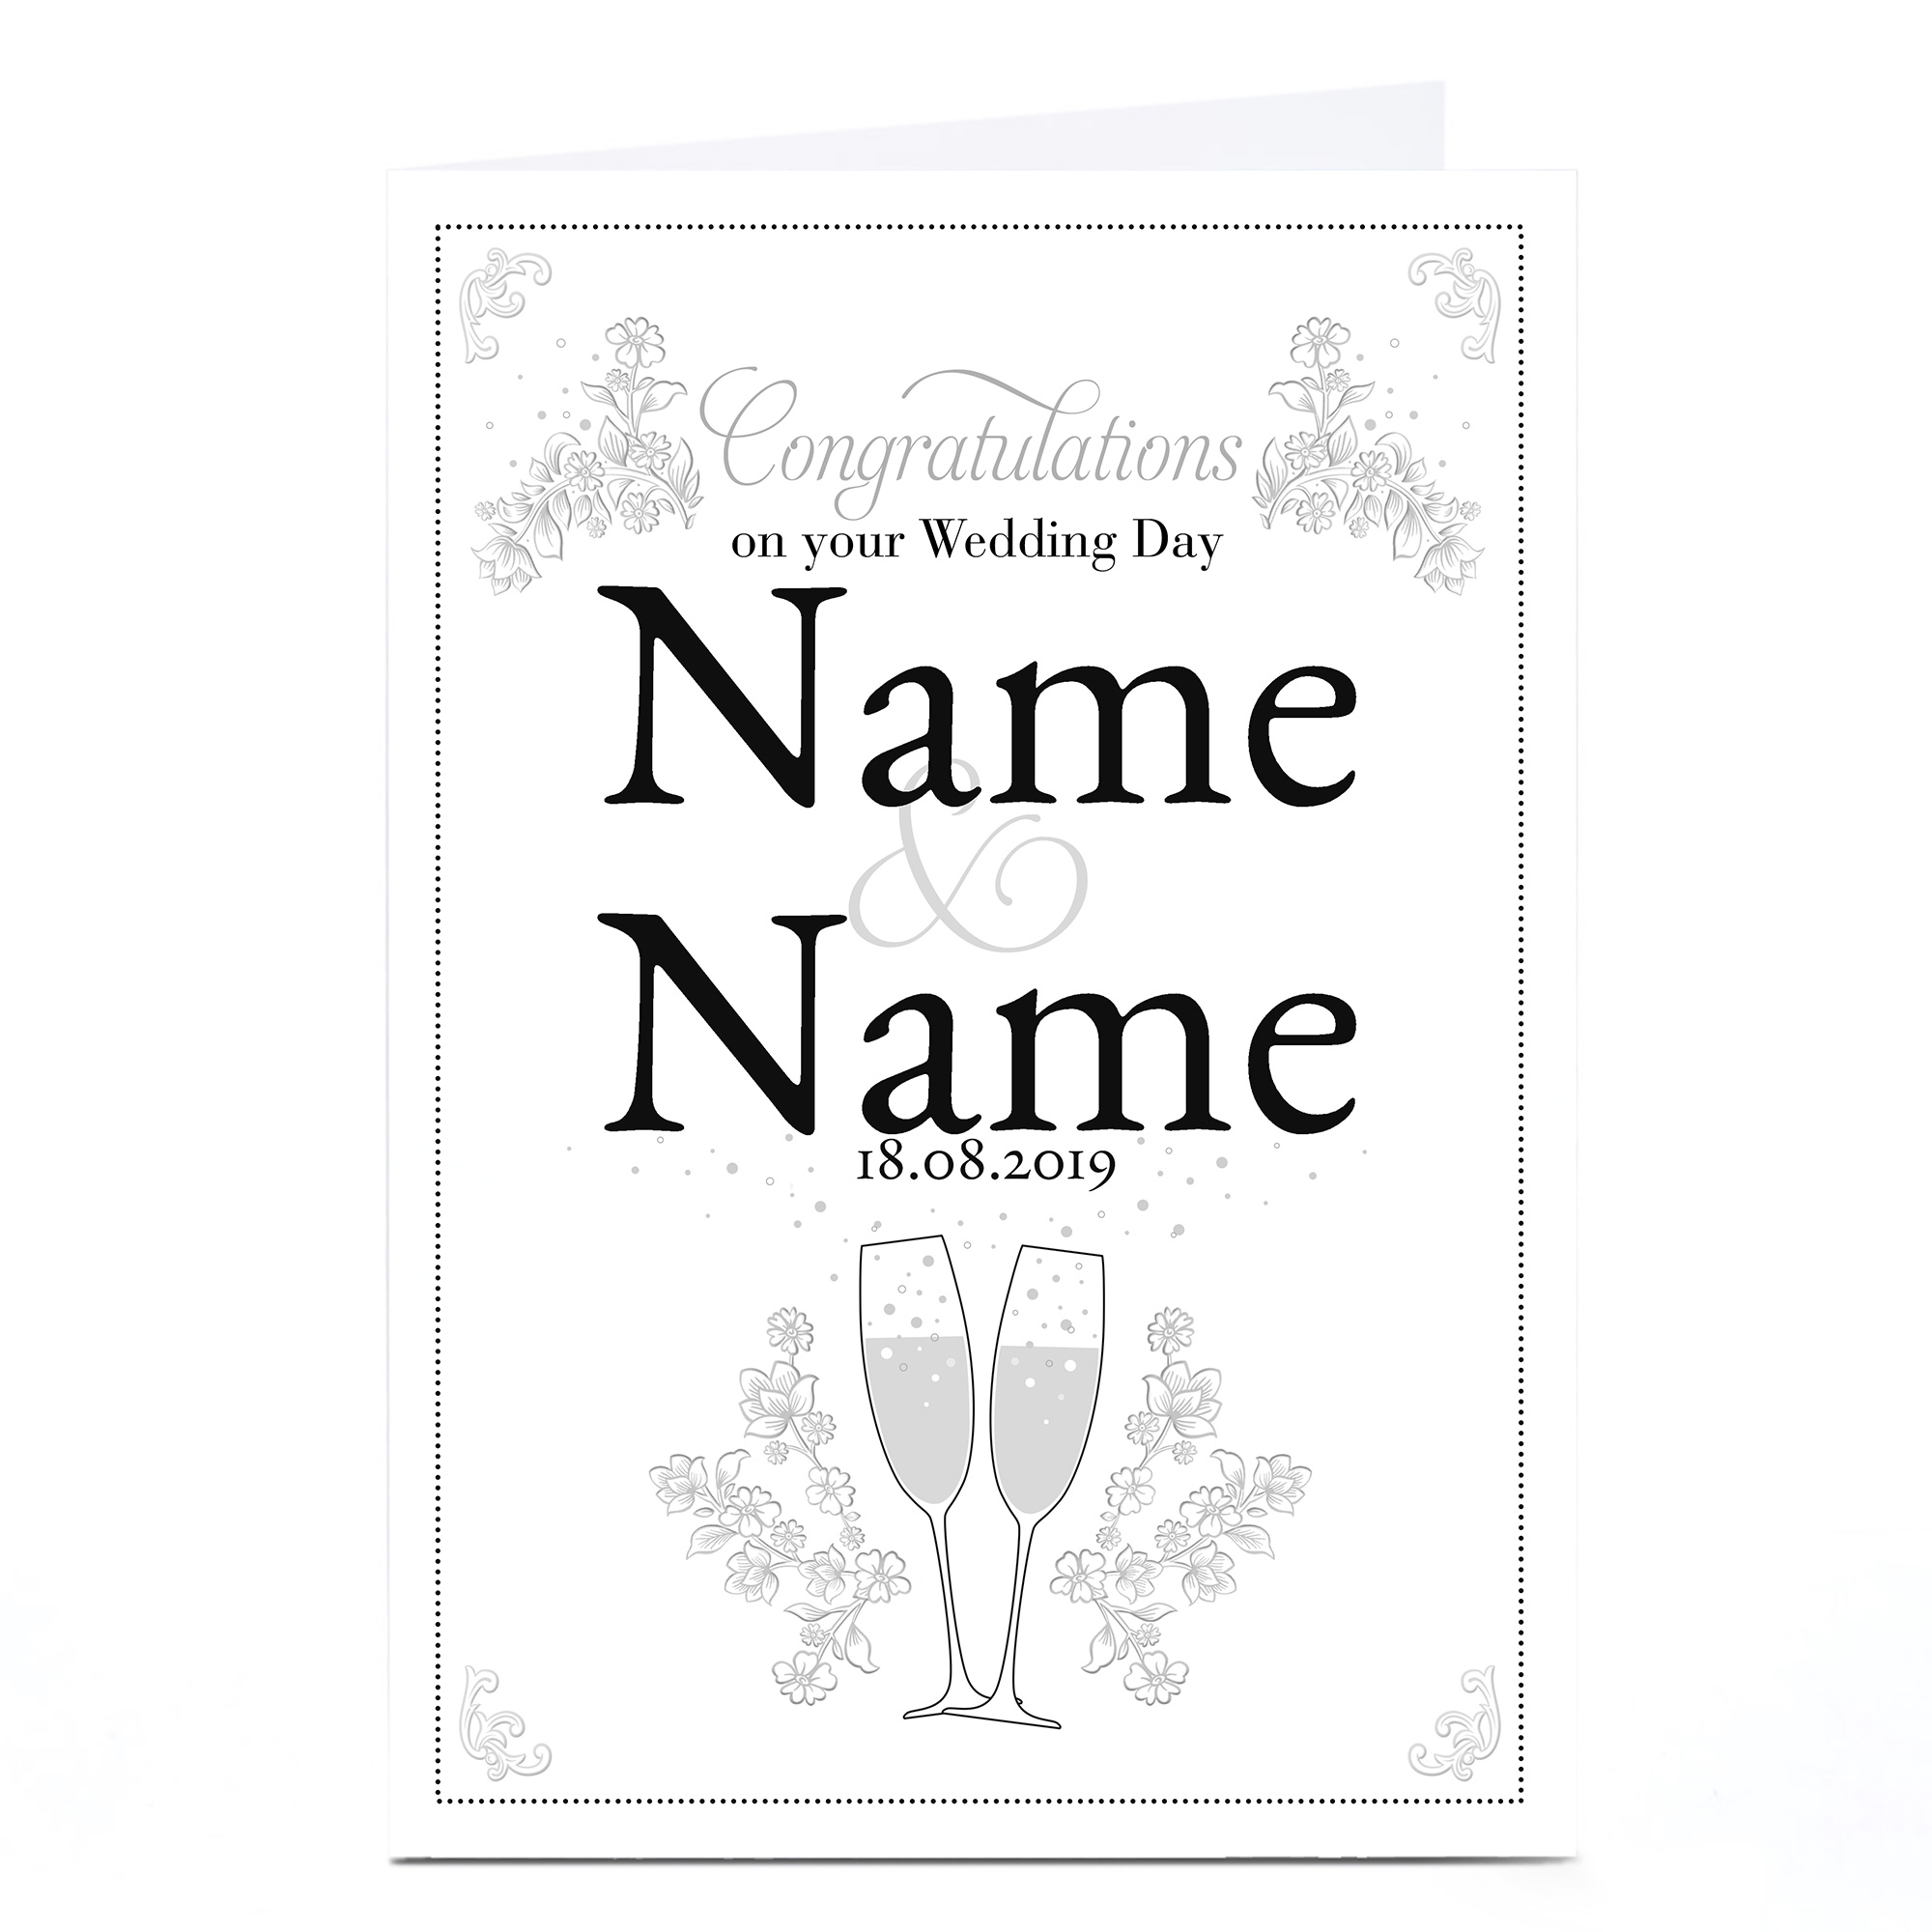 Personalised Wedding Card - Monochrome Congratulations, Any Names & Date